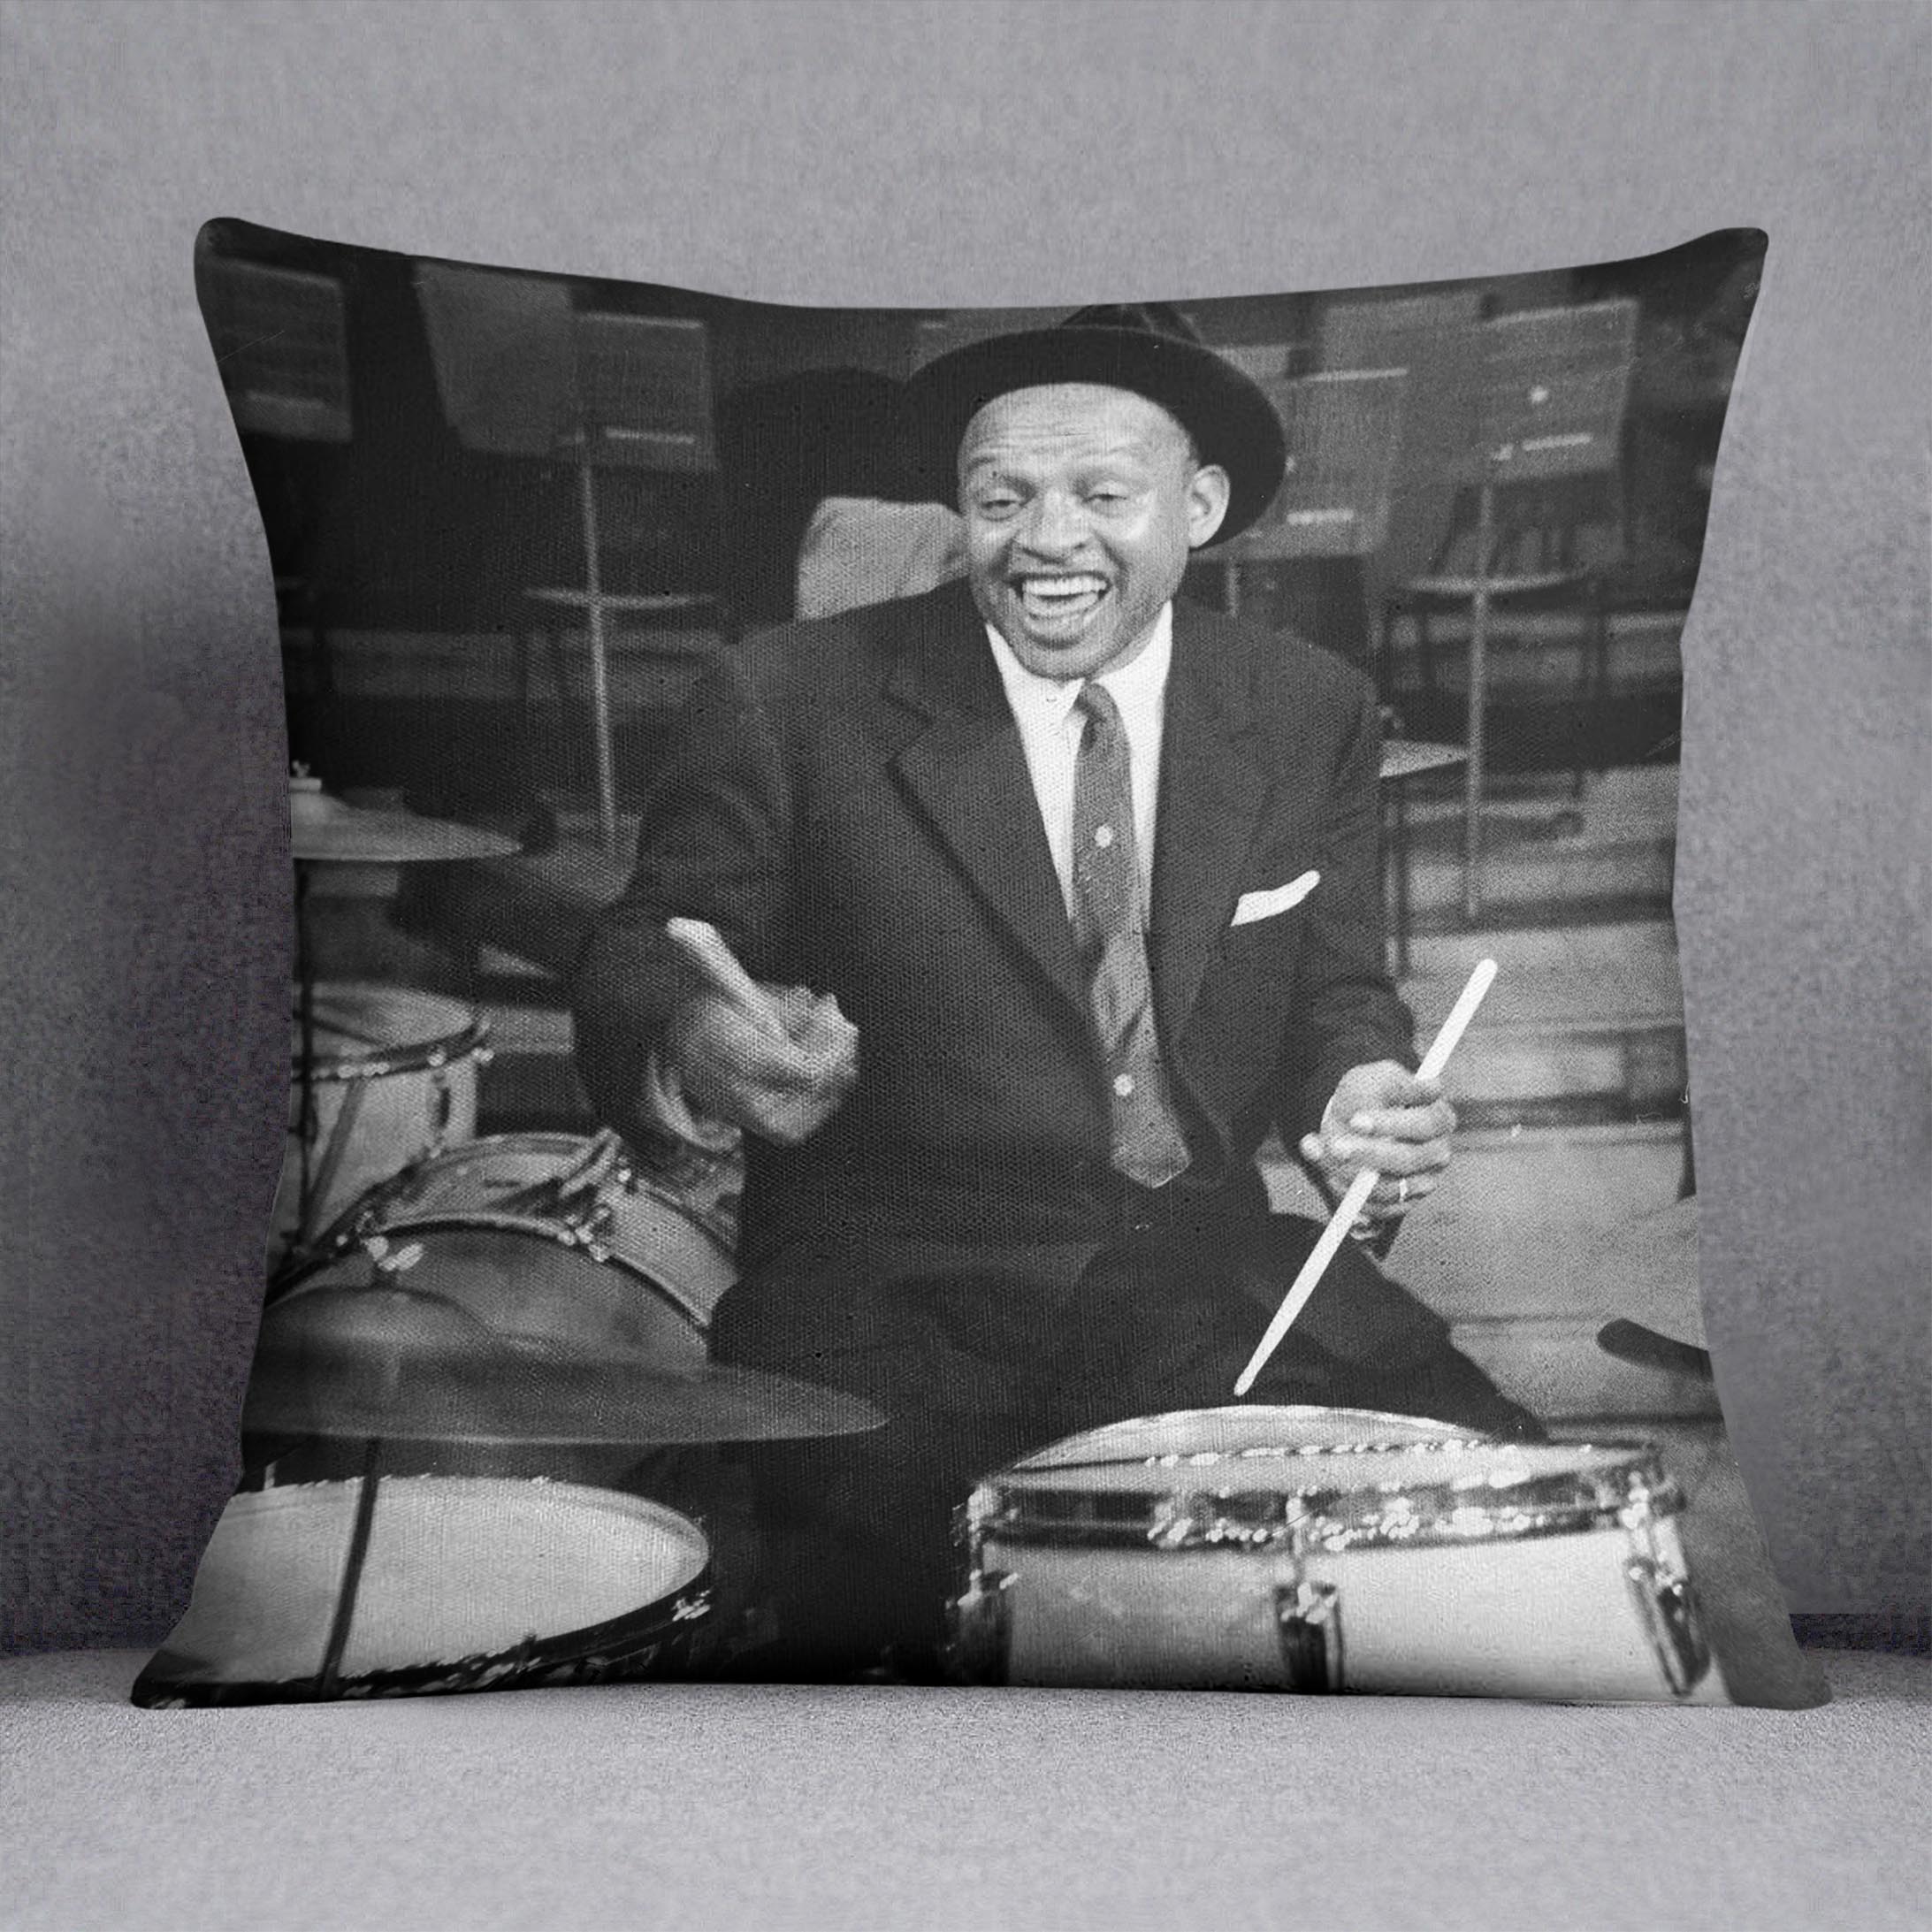 Lionel Hampton on the drums Cushion